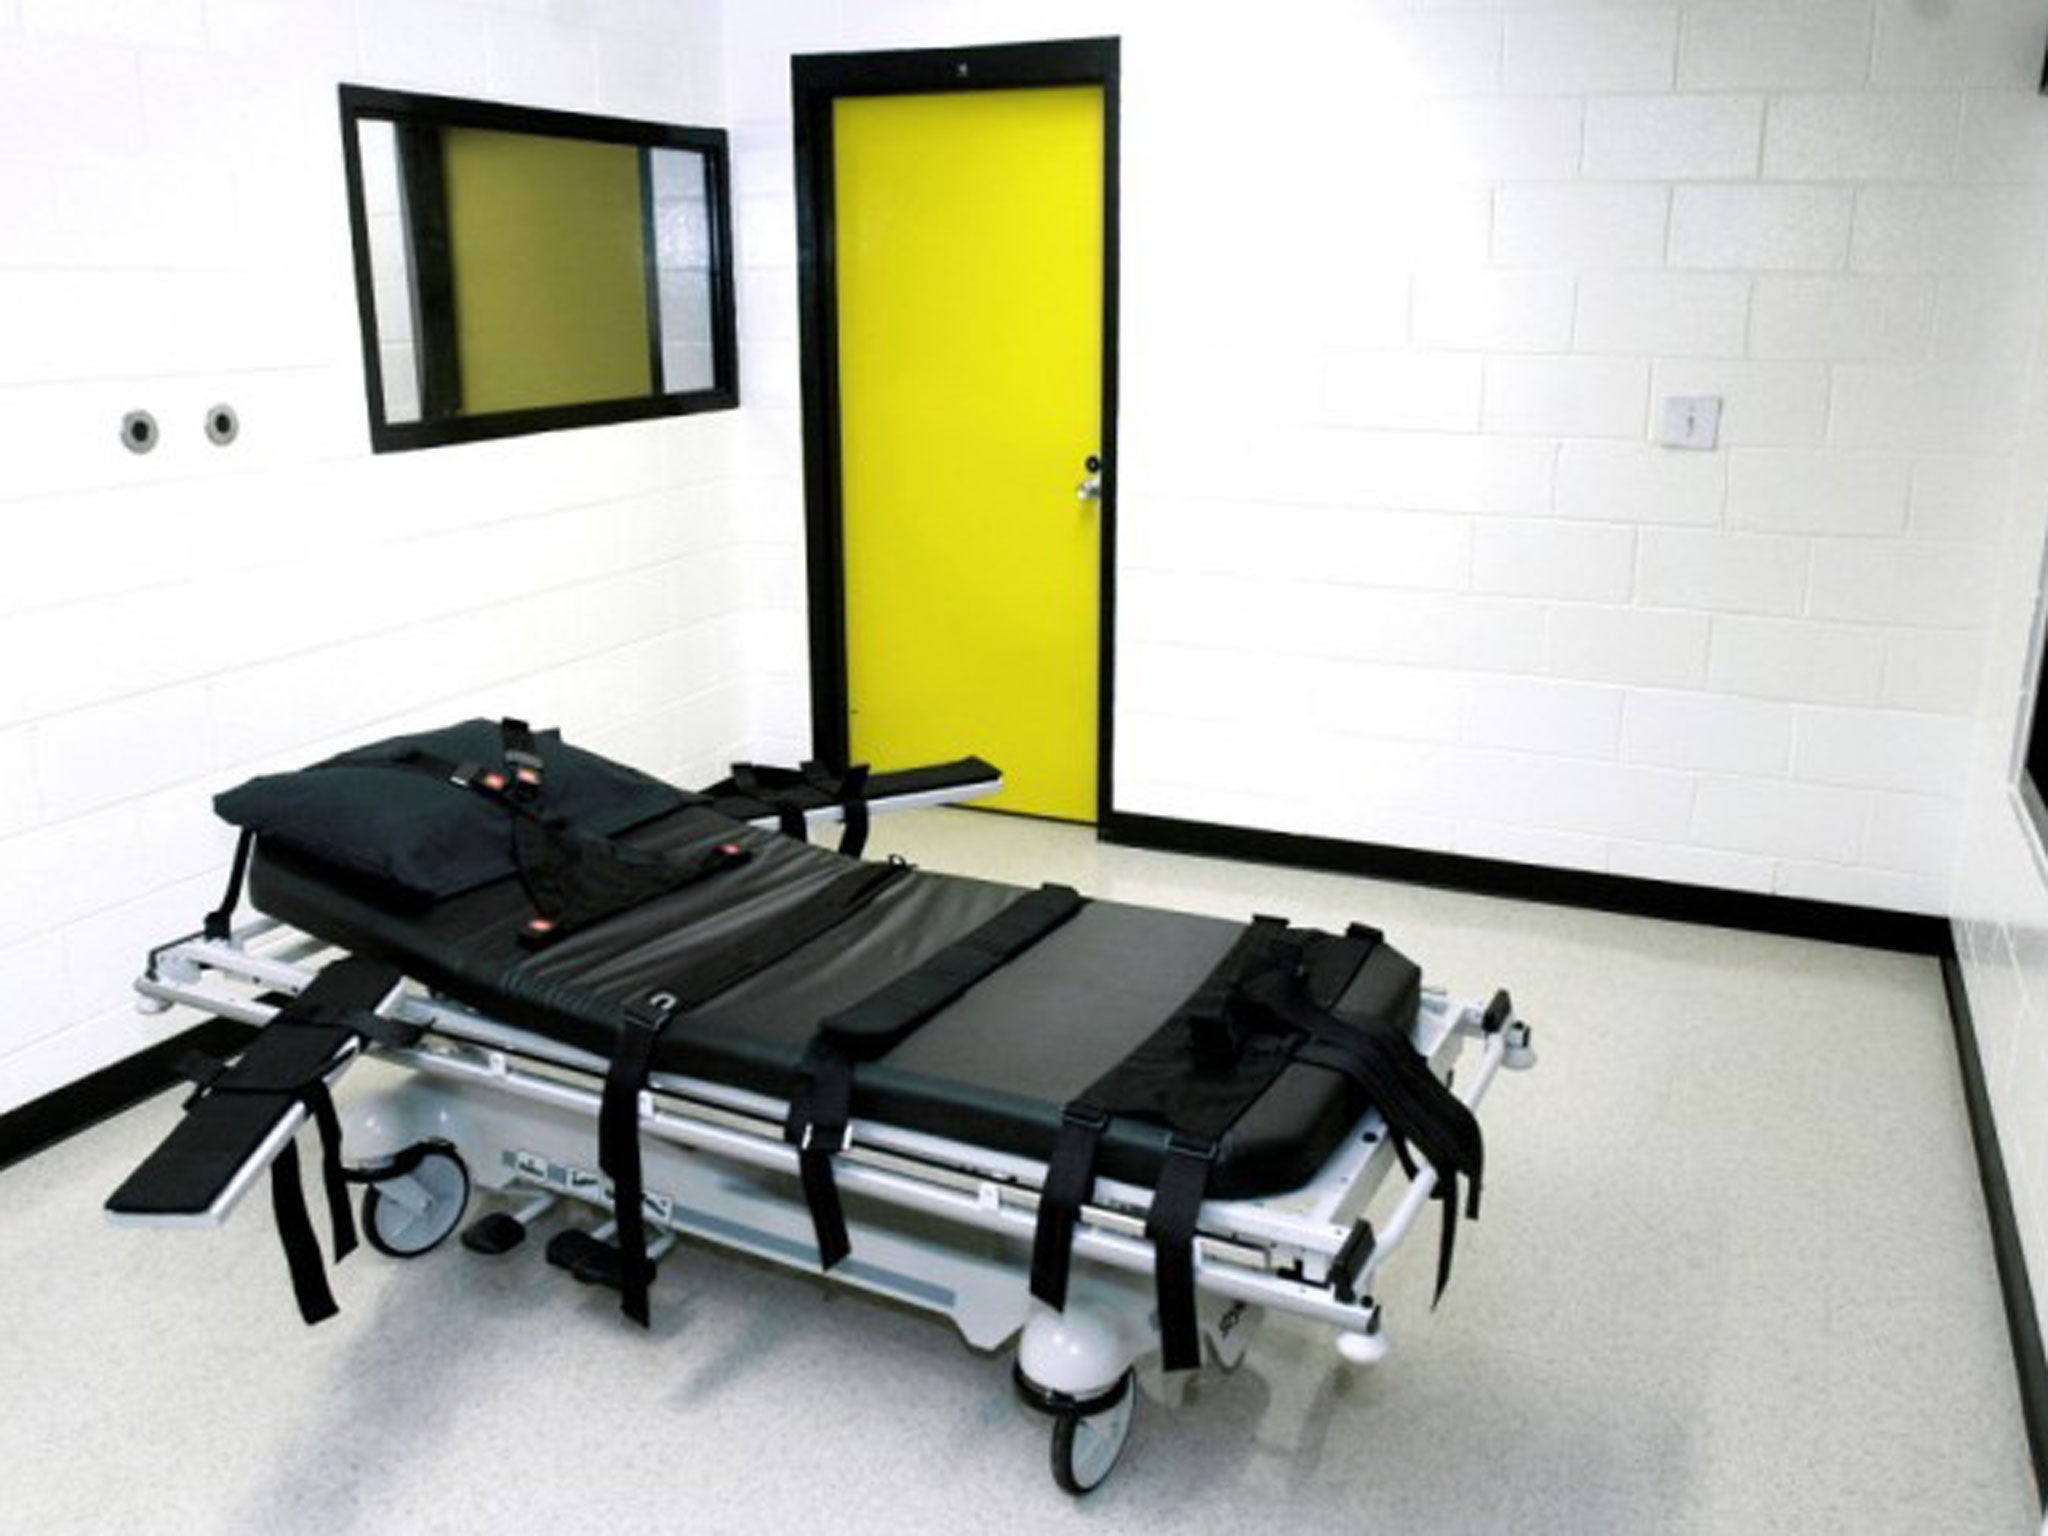 Out of favour: Only 12 of the 32 states which execute prisoners use the electric chair